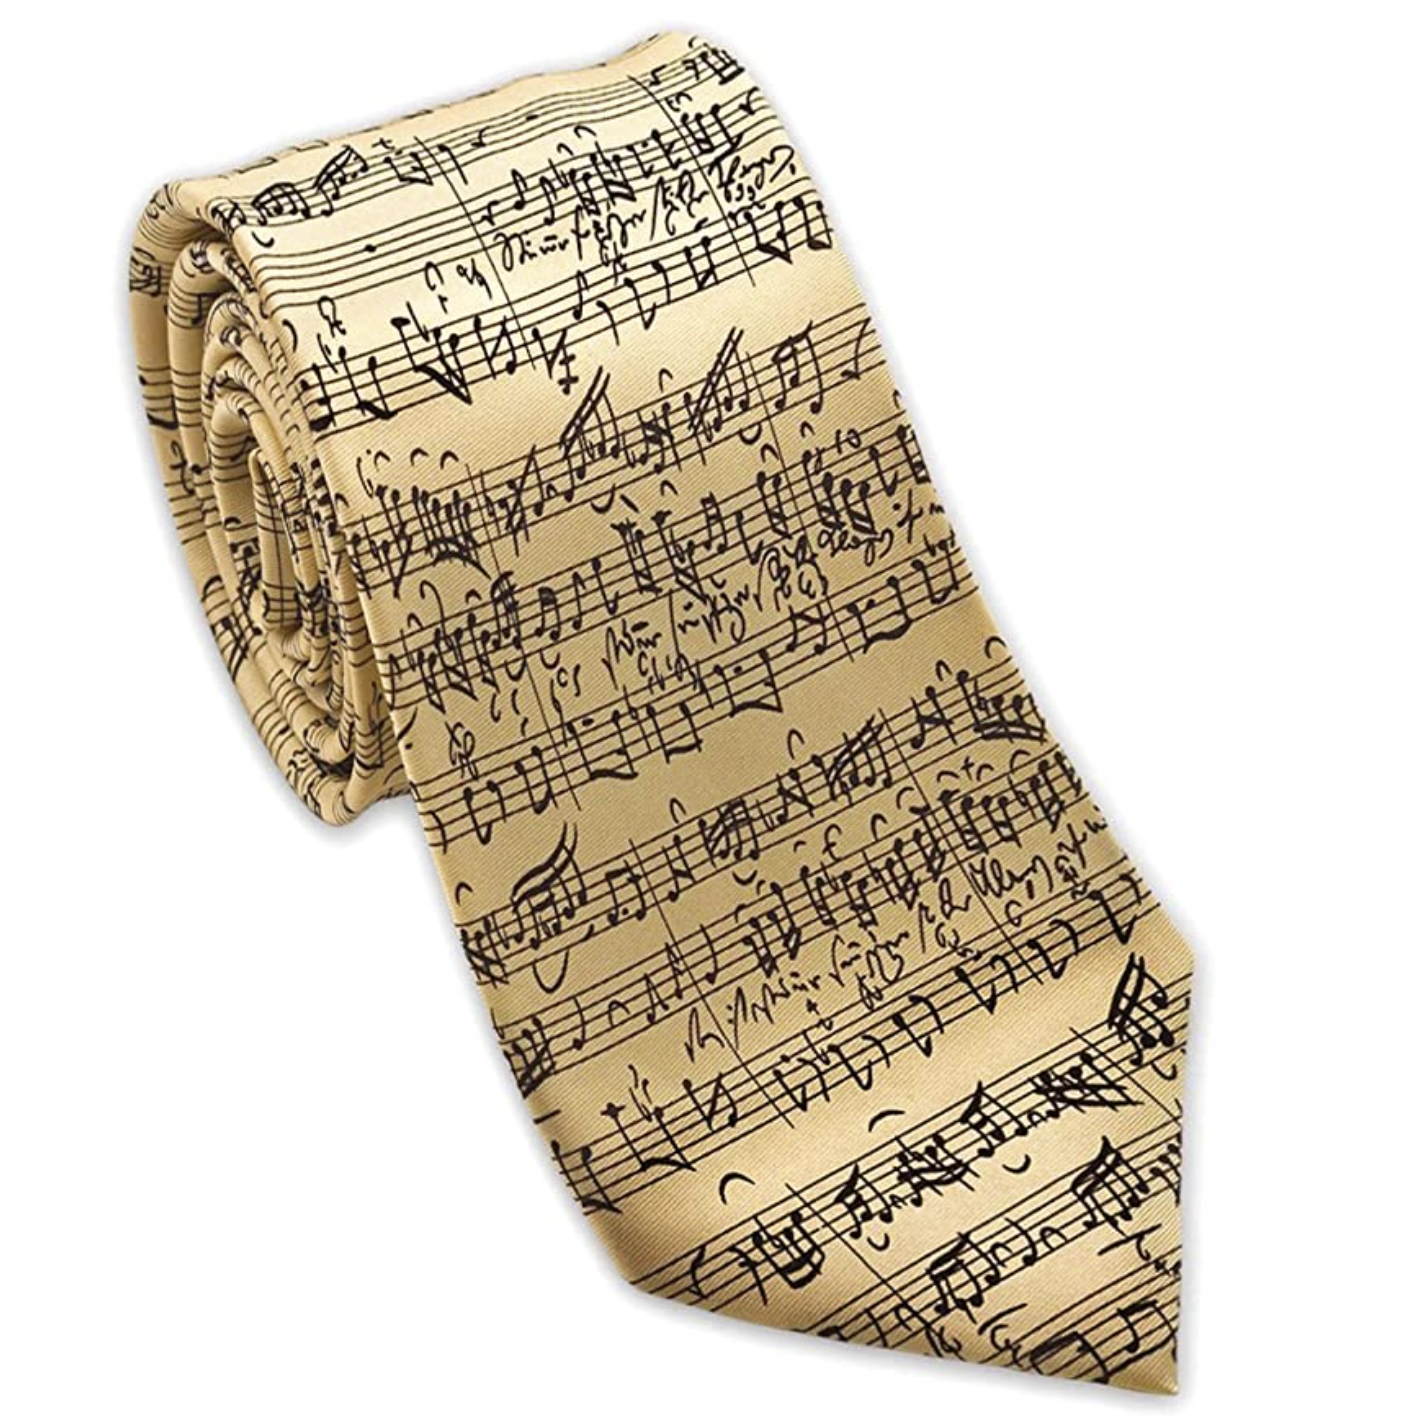 Grand Piano Gold & Silver Gents Tie Blue Musician Music Teacher Christmas Gift 